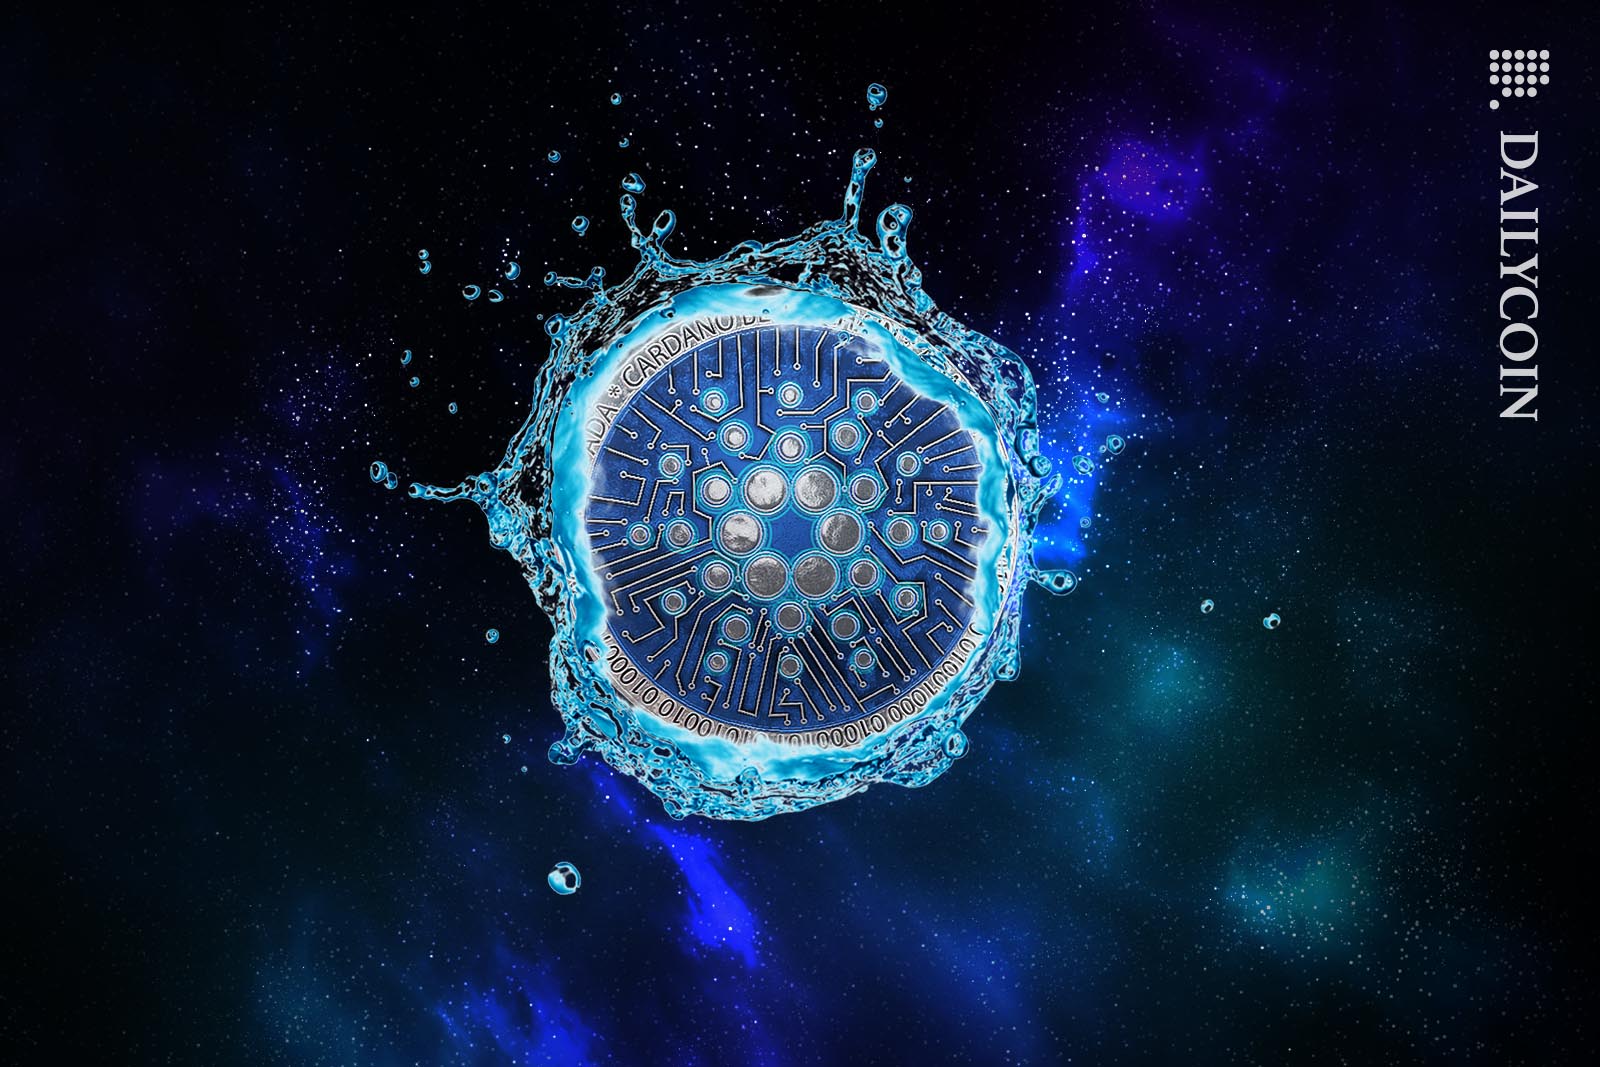 A Cardano coin with water splashing out of it floating in deep space.